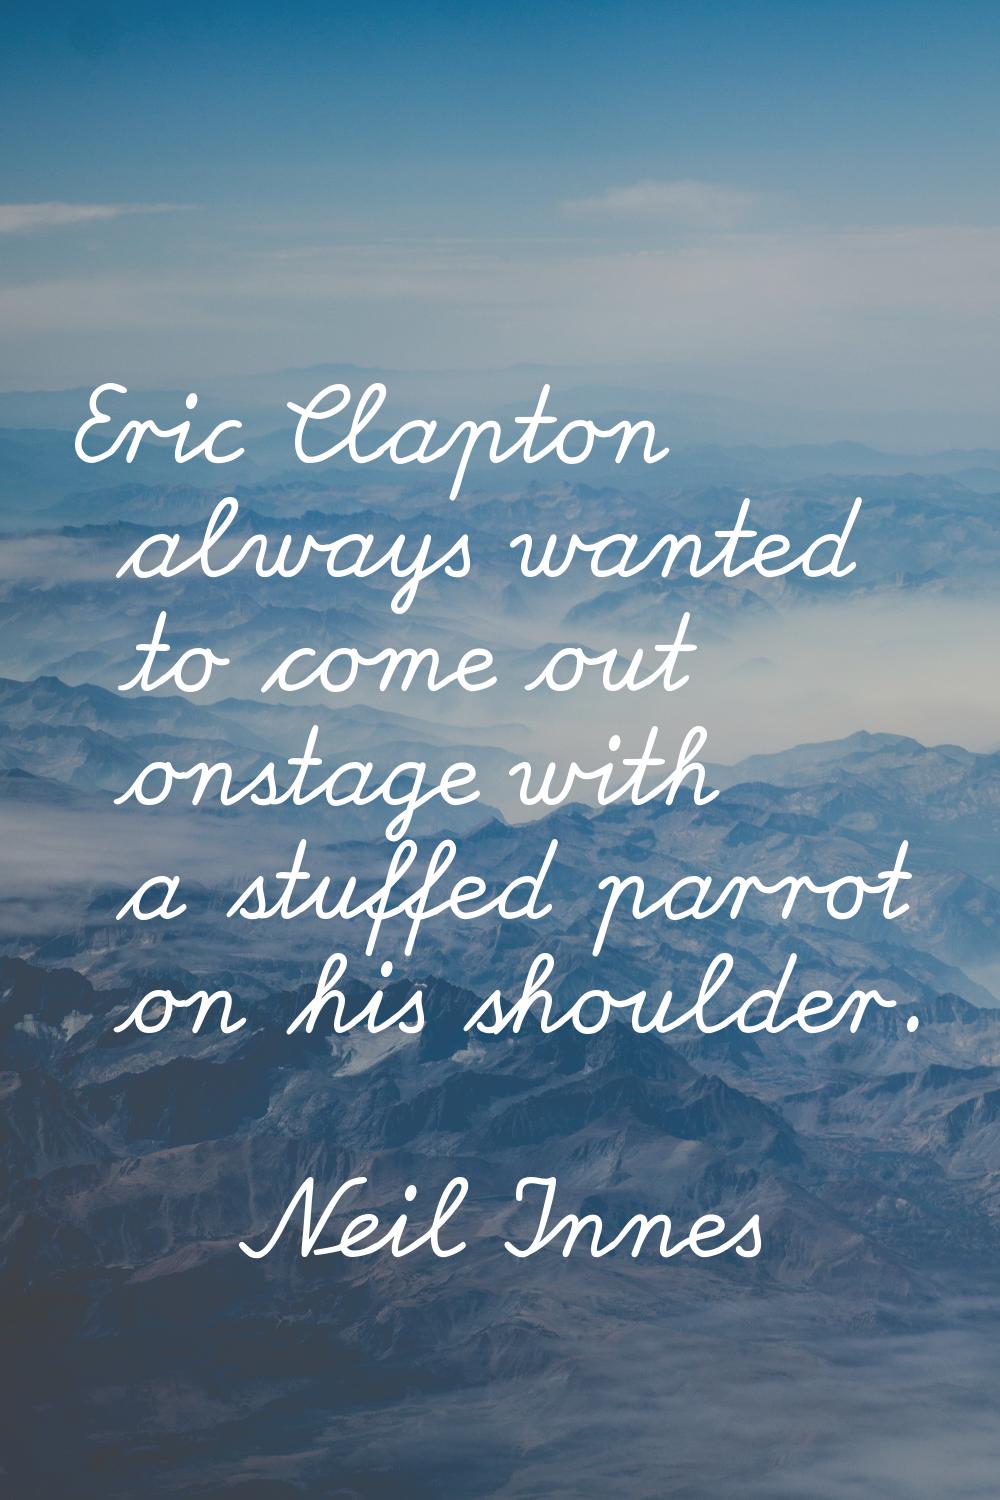 Eric Clapton always wanted to come out onstage with a stuffed parrot on his shoulder.